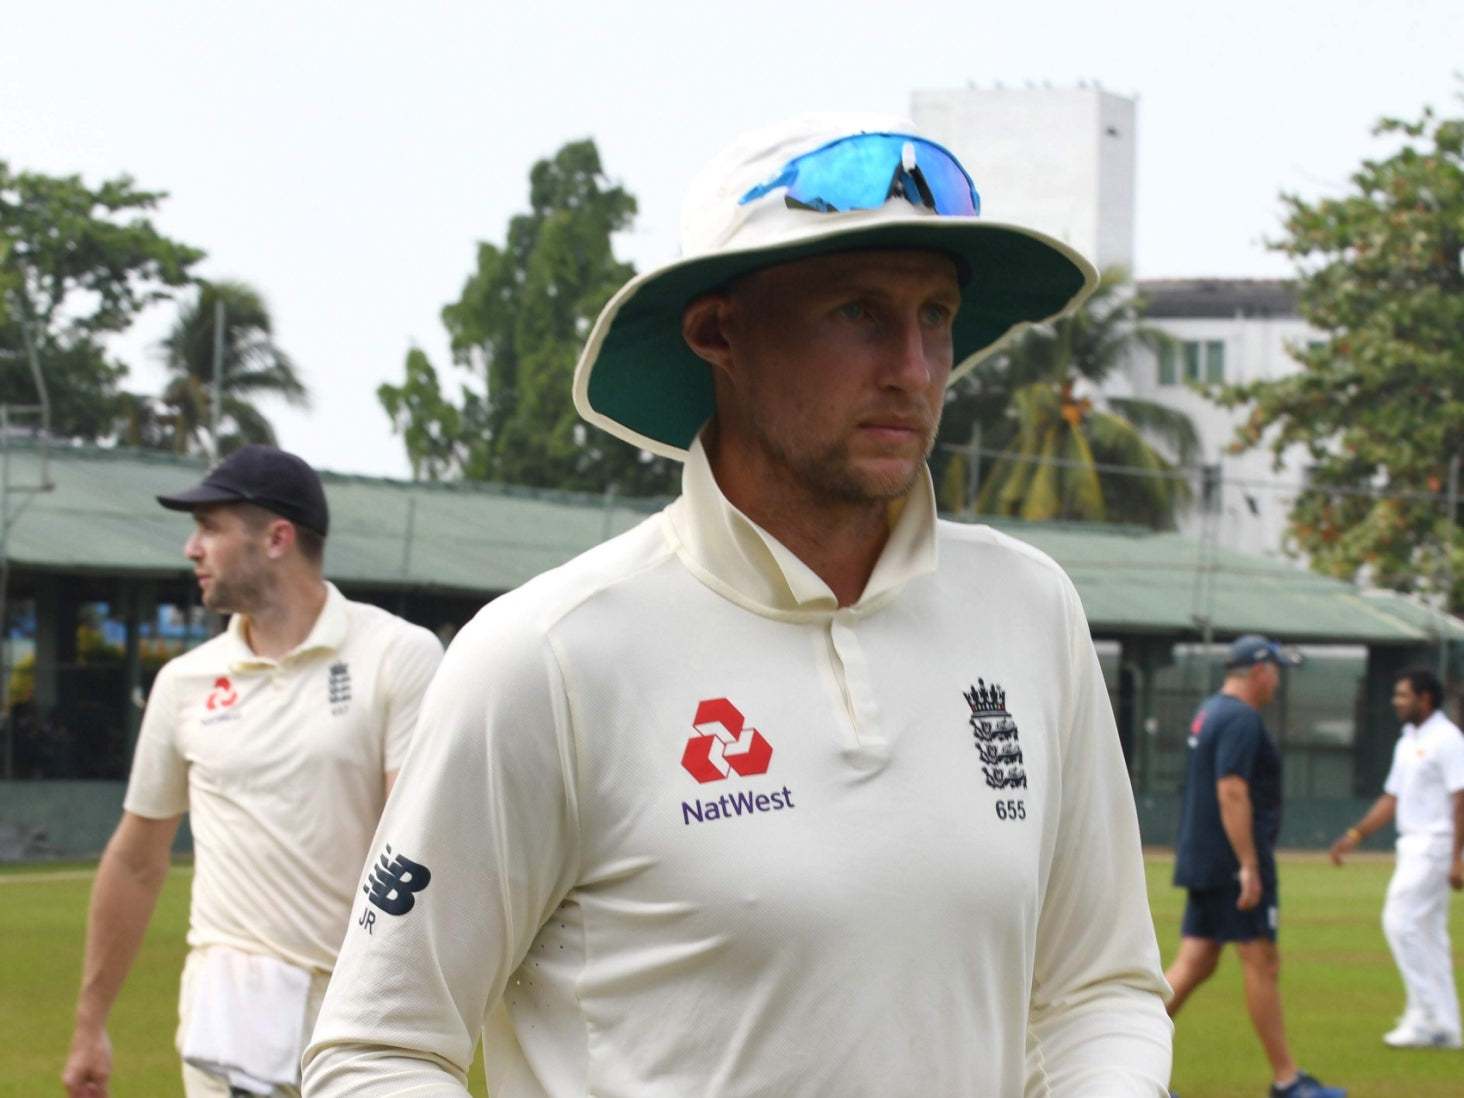 England captain Joe Root won't be one of those lining up this week as he awaits the birth of his second child